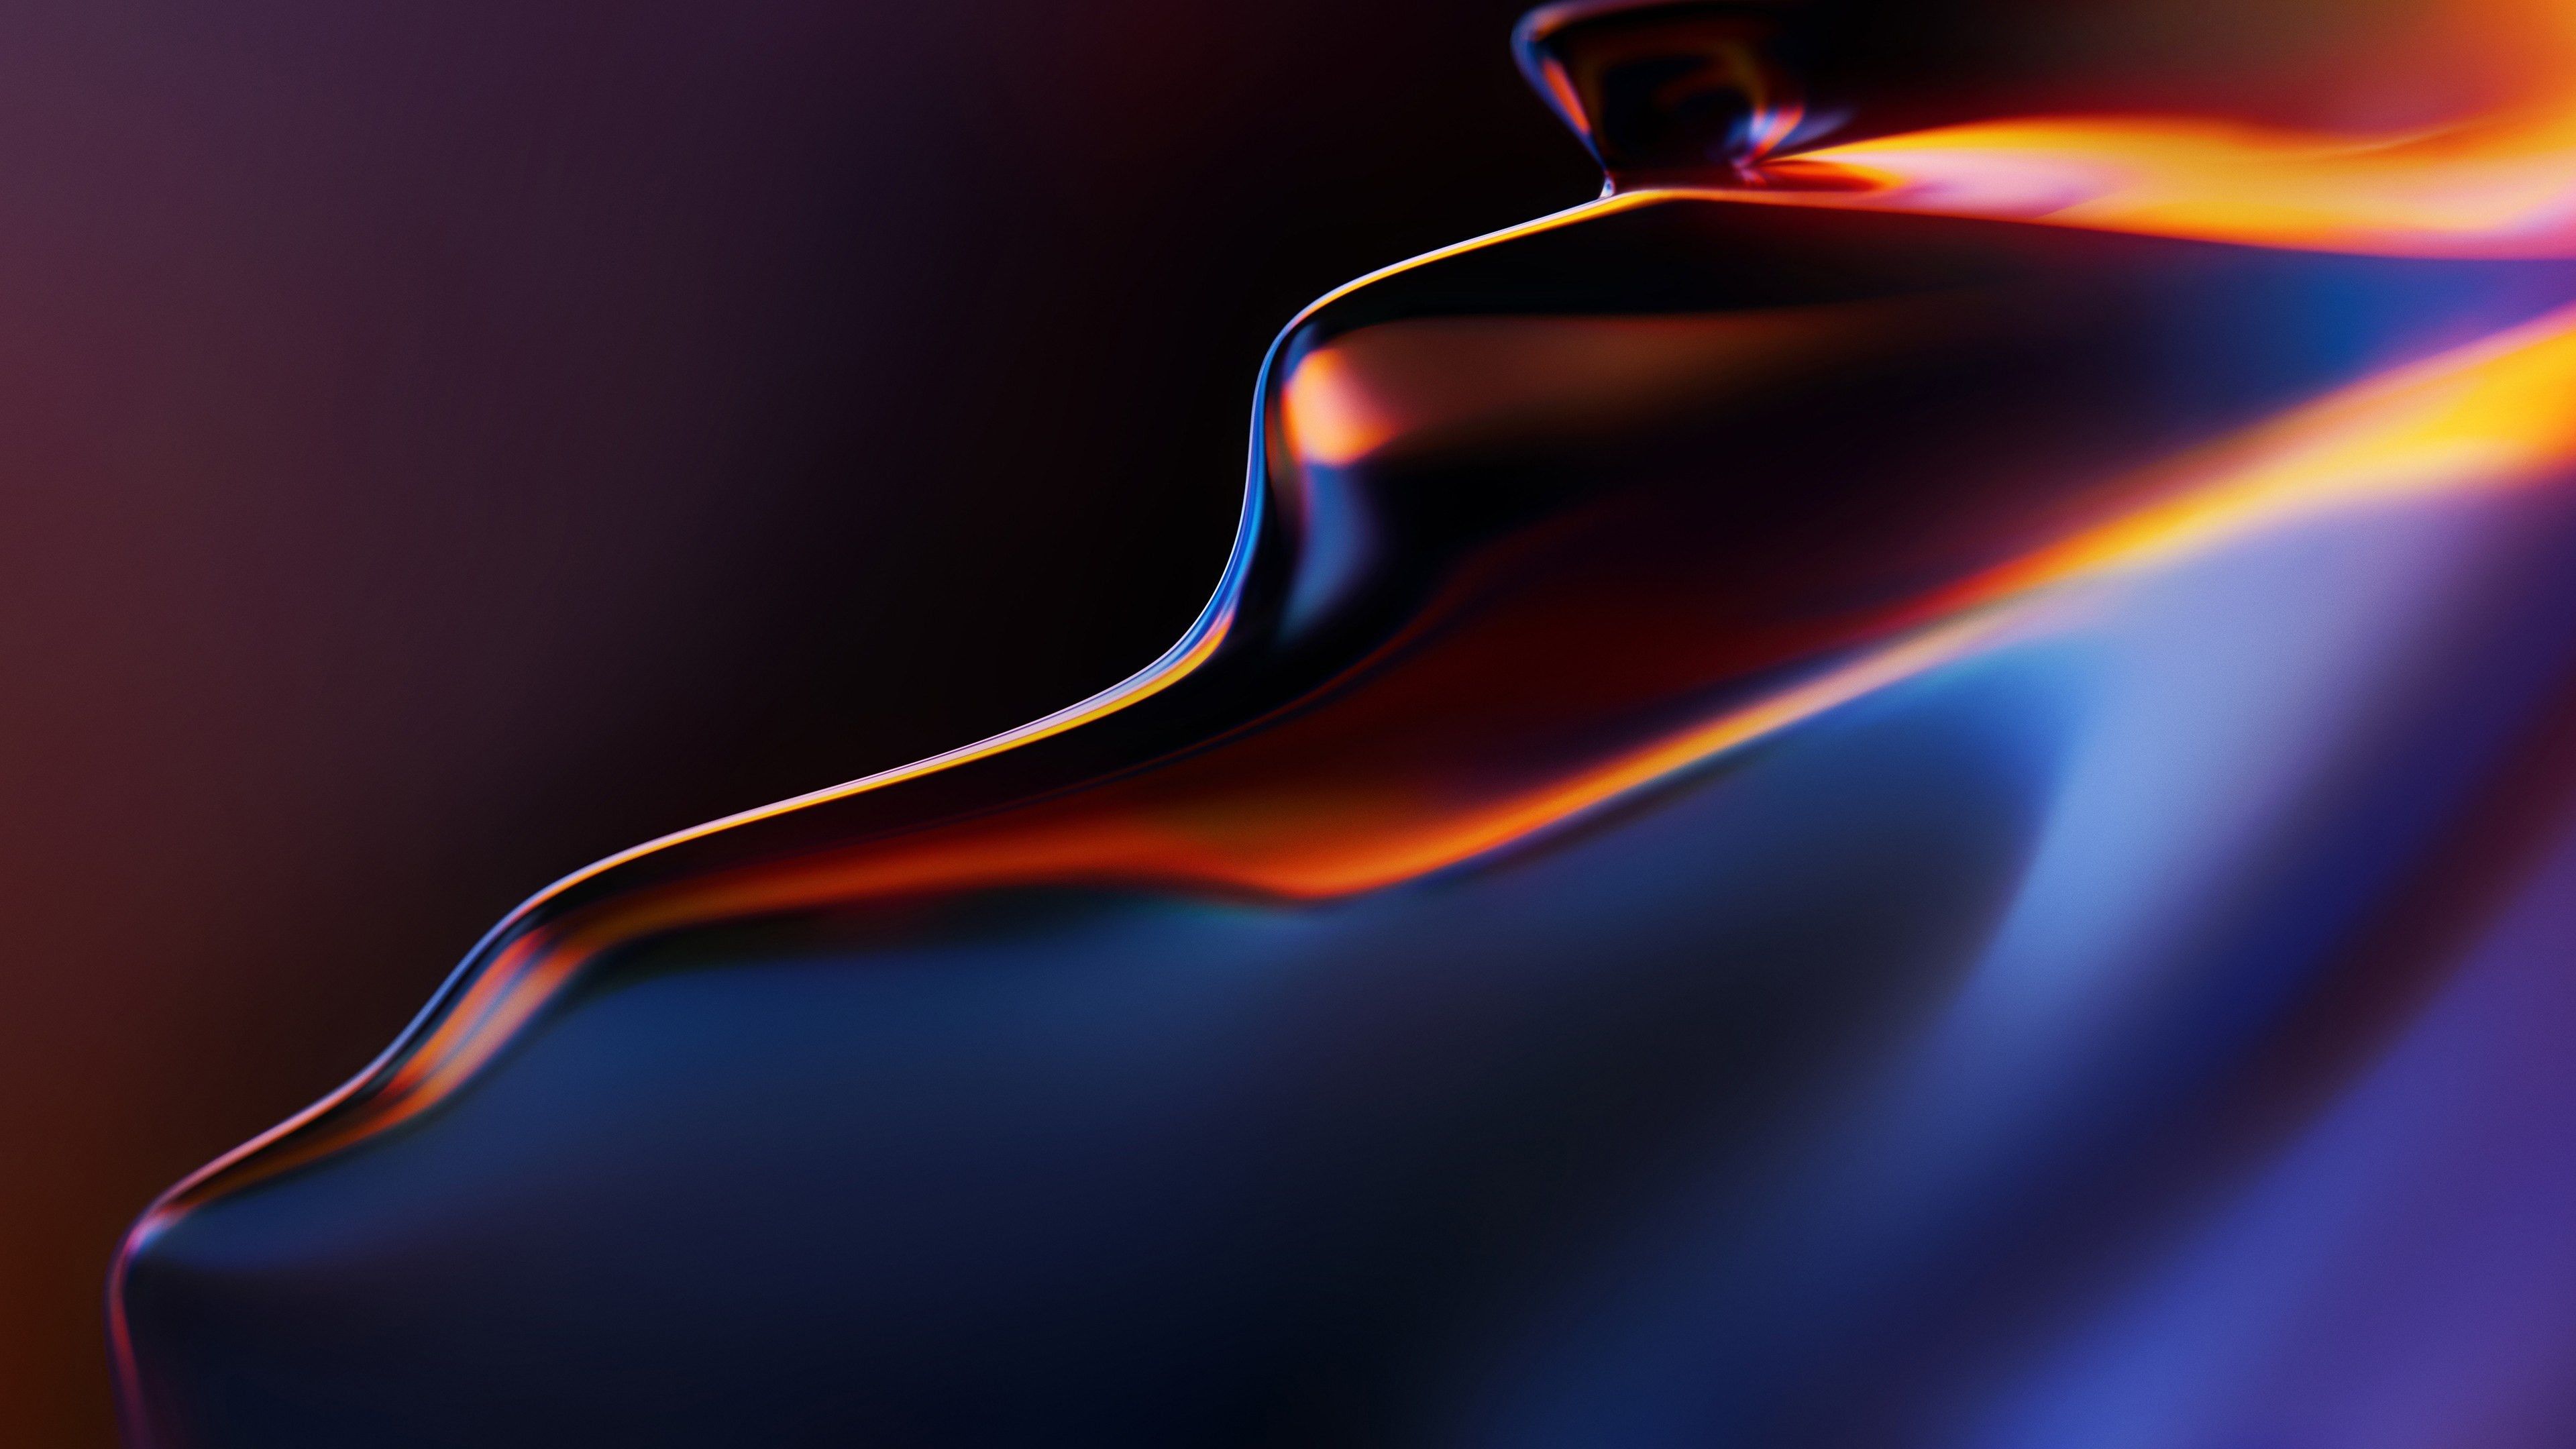 Download wallpaper: Abstract, flow, OnePlus 6T 3840x2160